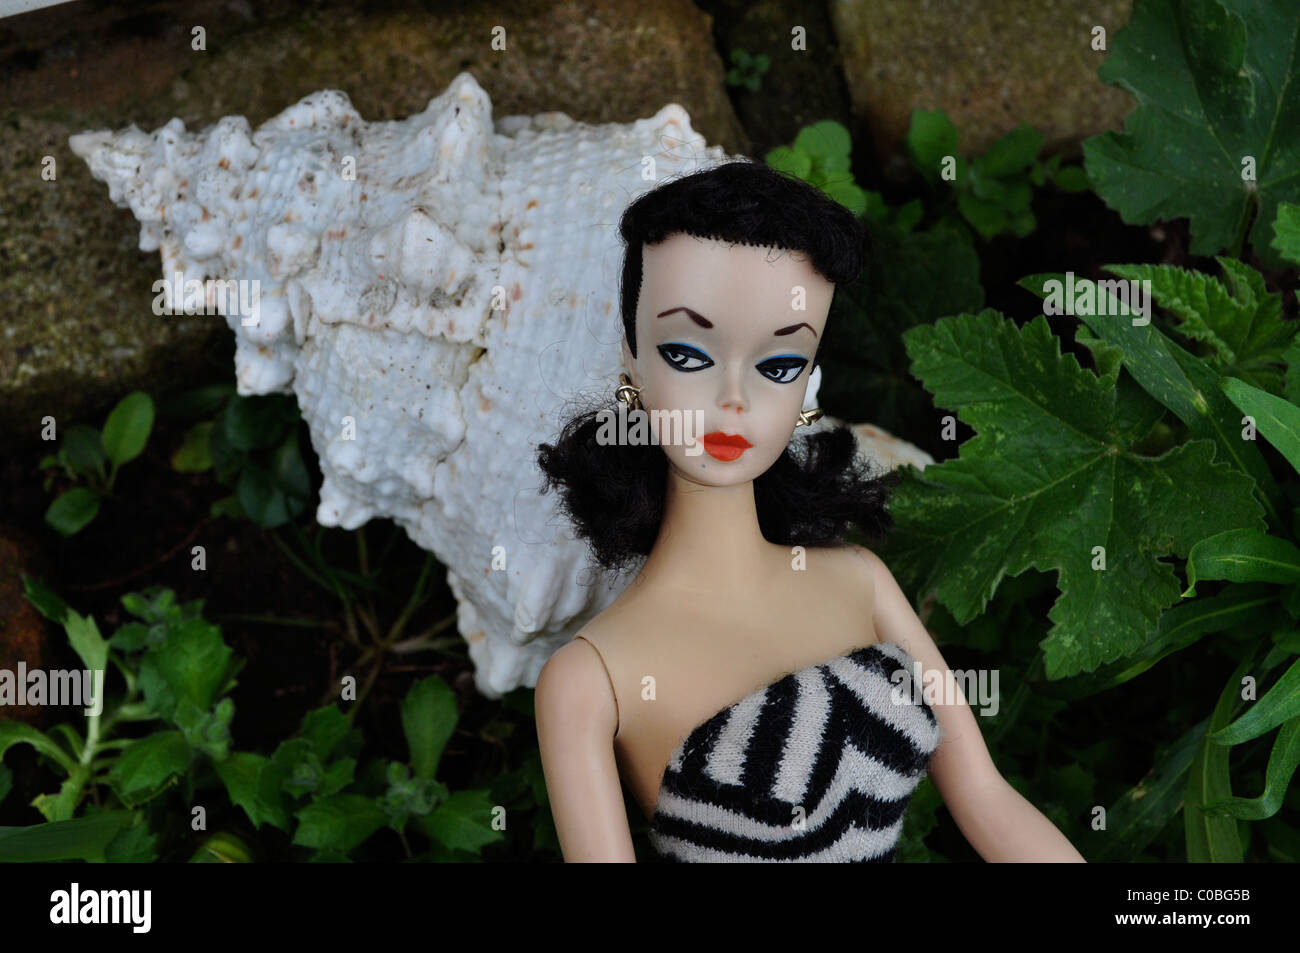 First Barbie doll made in 1959 in Japan, #1 Barbie doll with arched  eyebrows, black and white eye paint and matching swimsuit Stock Photo -  Alamy